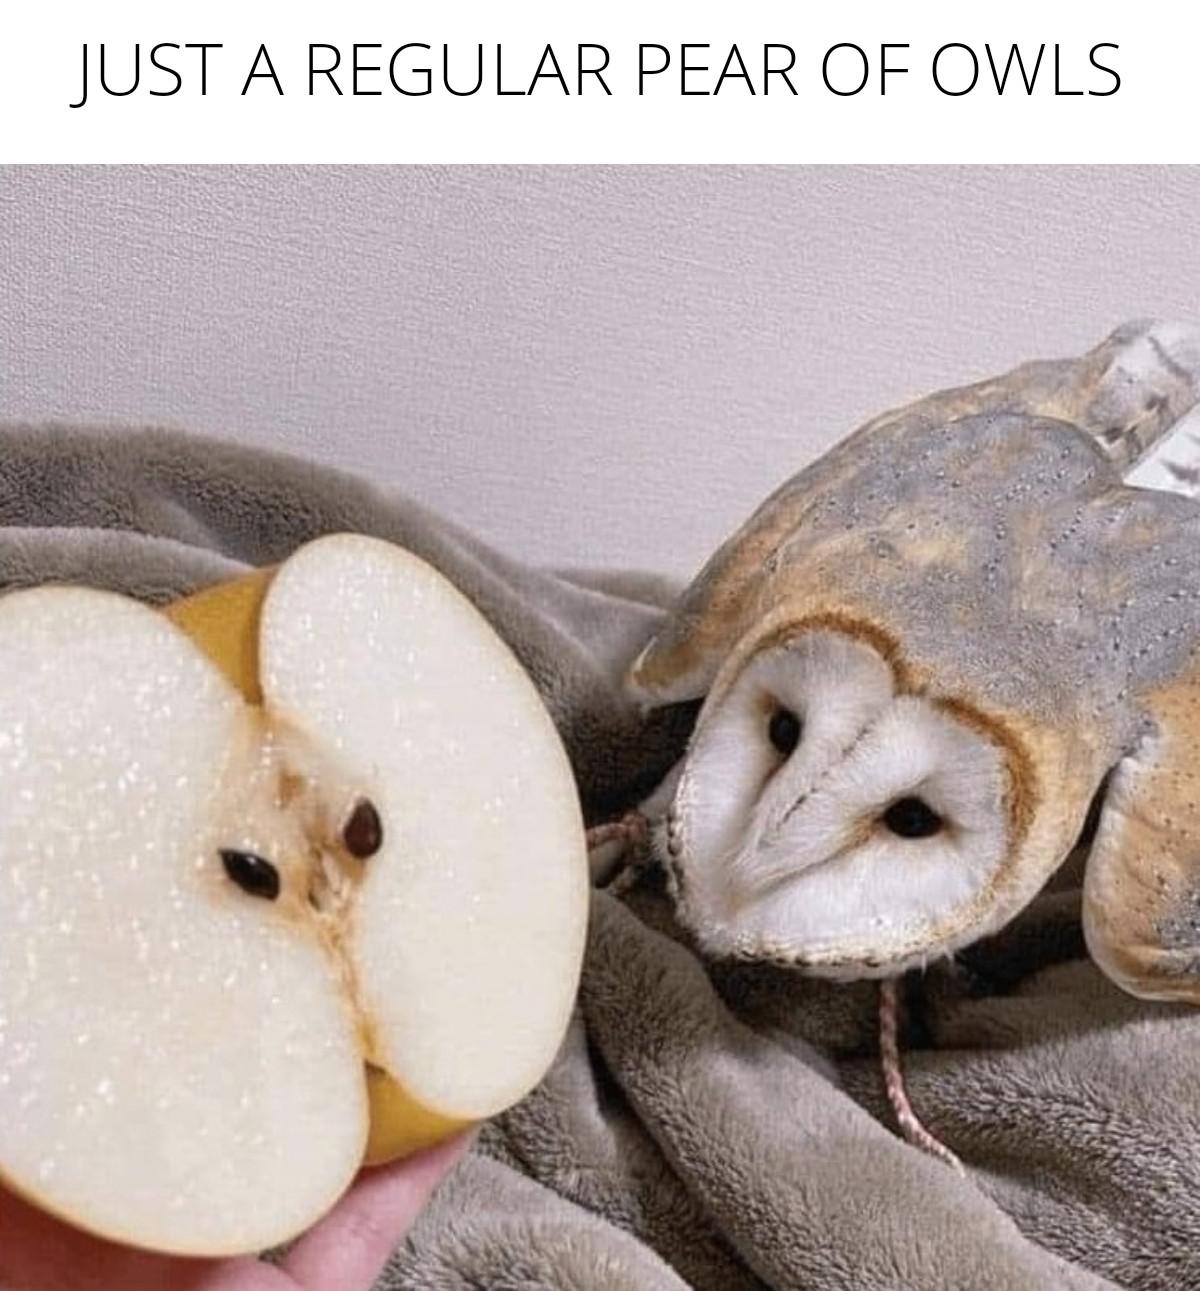 funny memes - dank memes - brother what have they done to you - Just A Regular Pear Of Owls